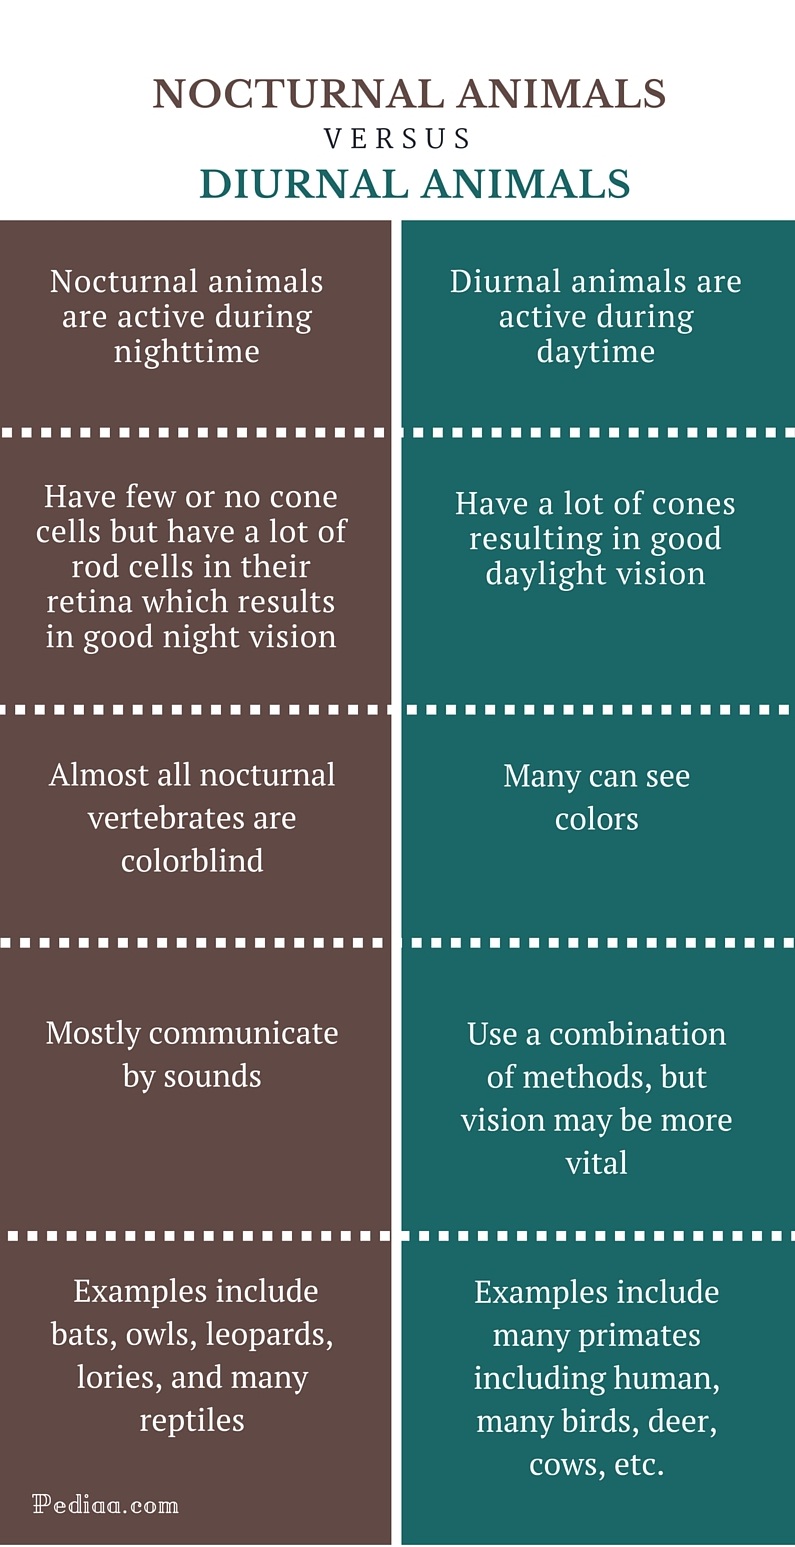 Difference Between Nocturnal and Diurnal Animals - infographic (1)